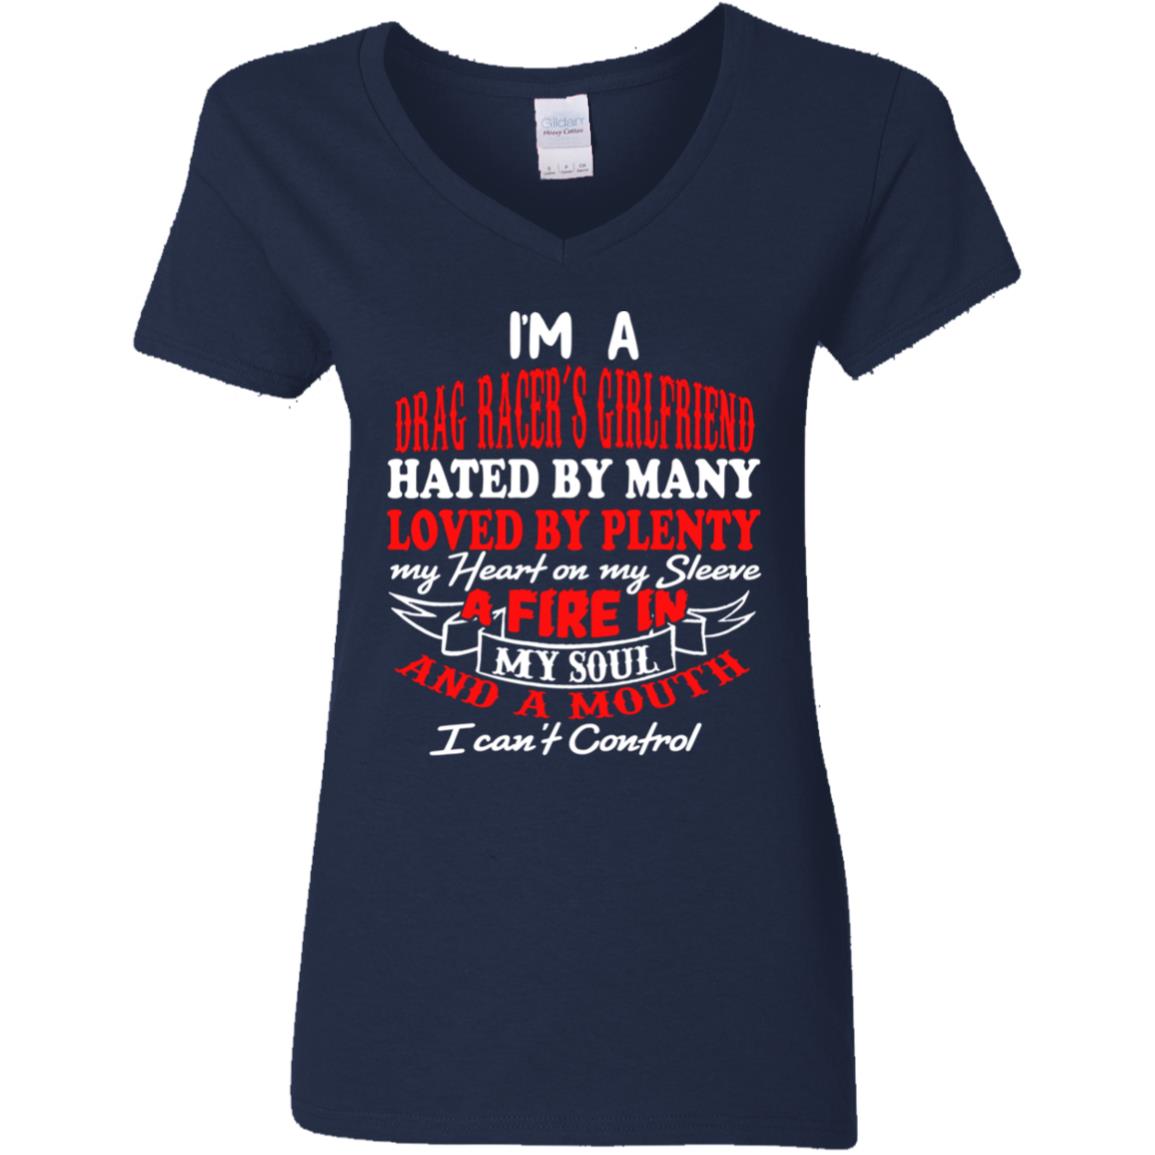 I'm A Drag Racer's Girlfriend Hated By Many Loved By Plenty Ladies' 5.3 oz. V-Neck T-Shirt